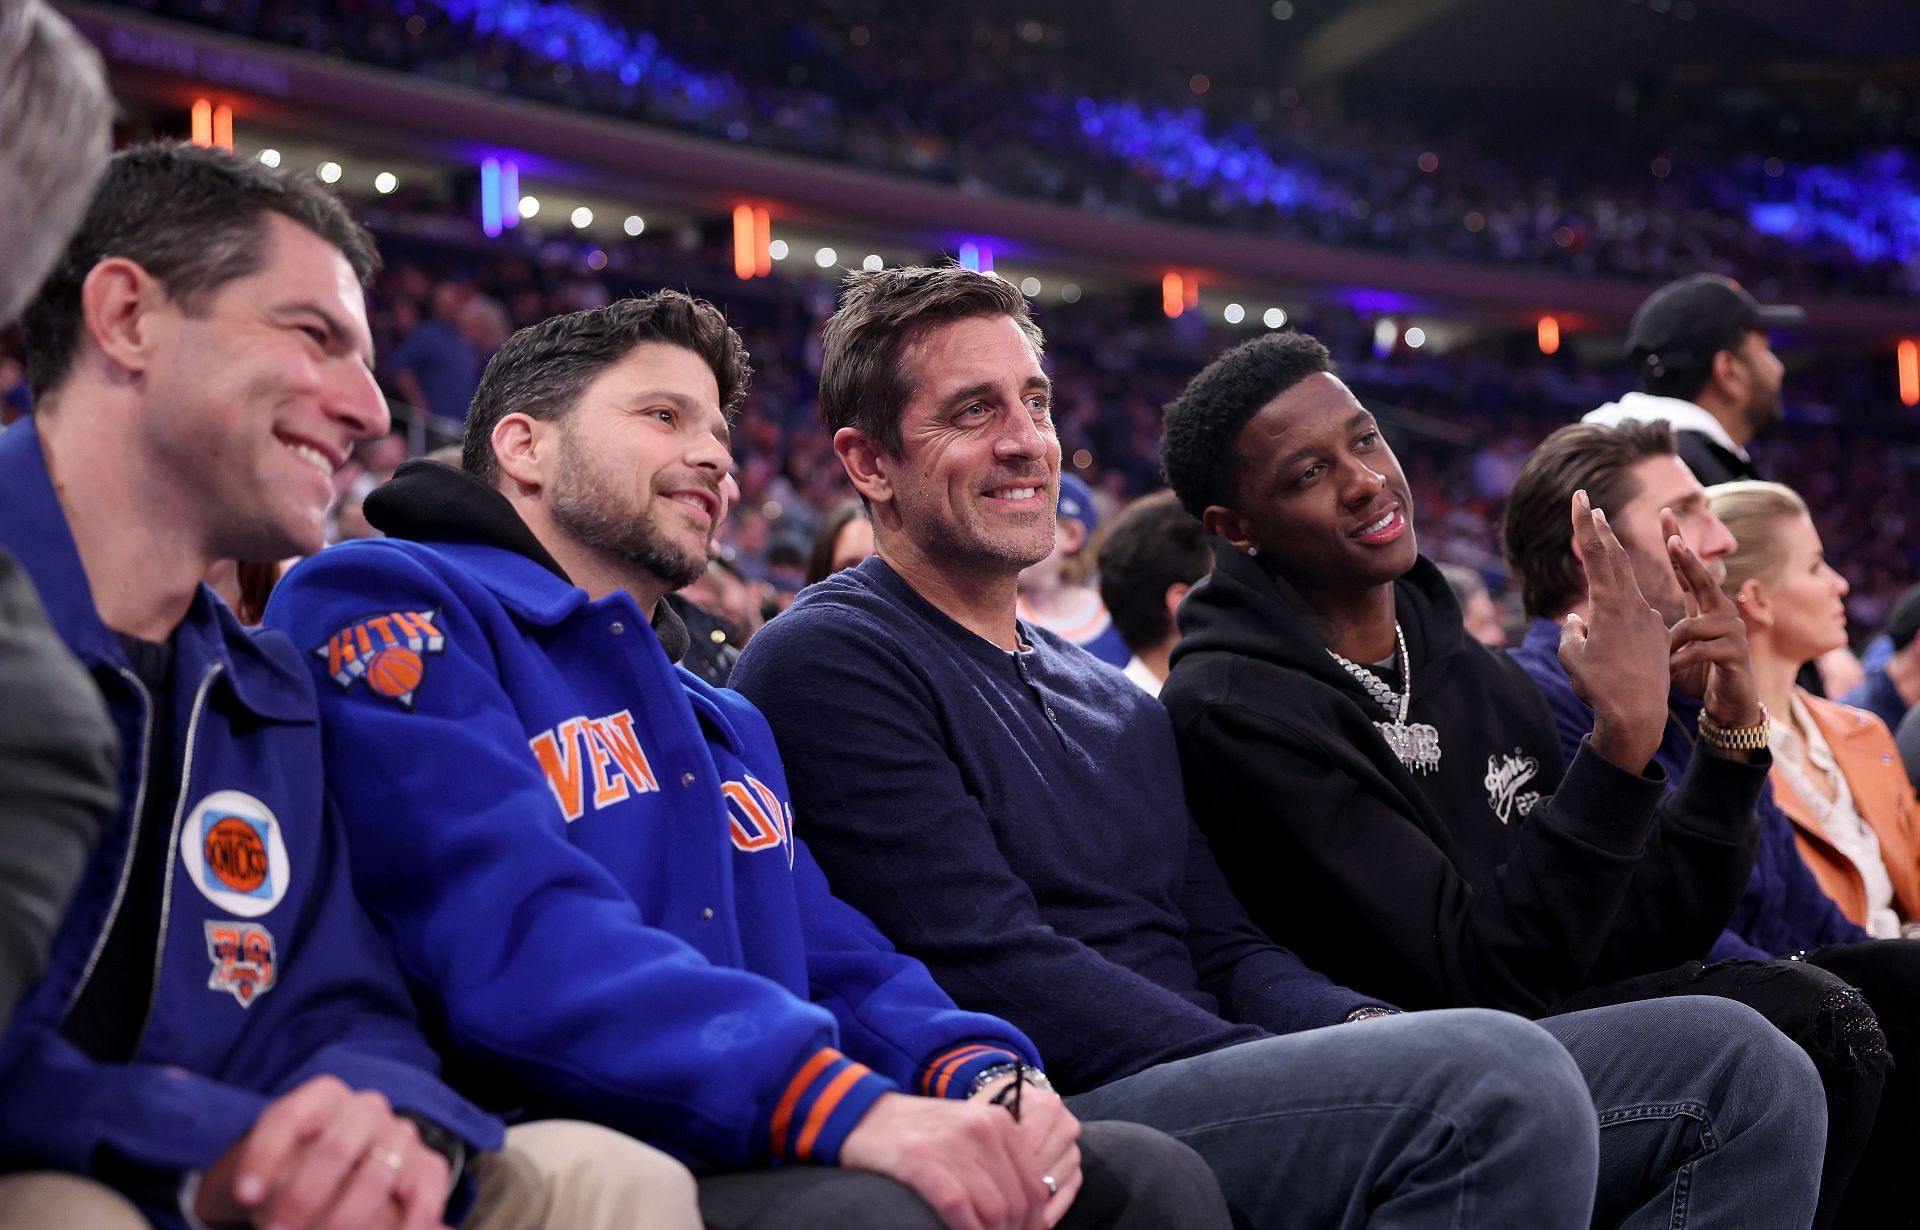 Rodgers at a Miami Heat v New York Knicks game